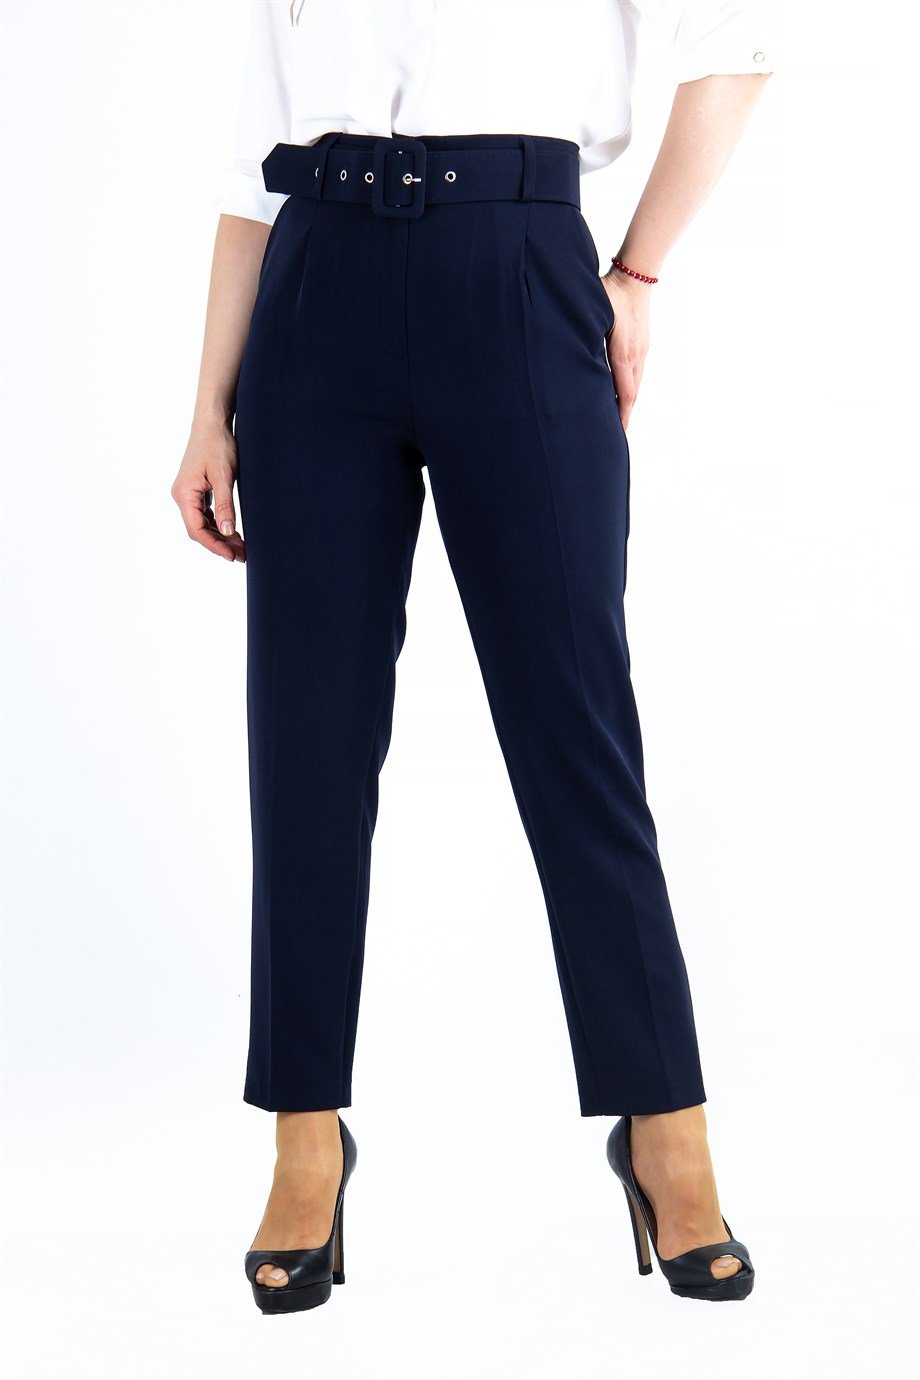 Classic office attire: New Navy Blue pants for women Size 2 fully